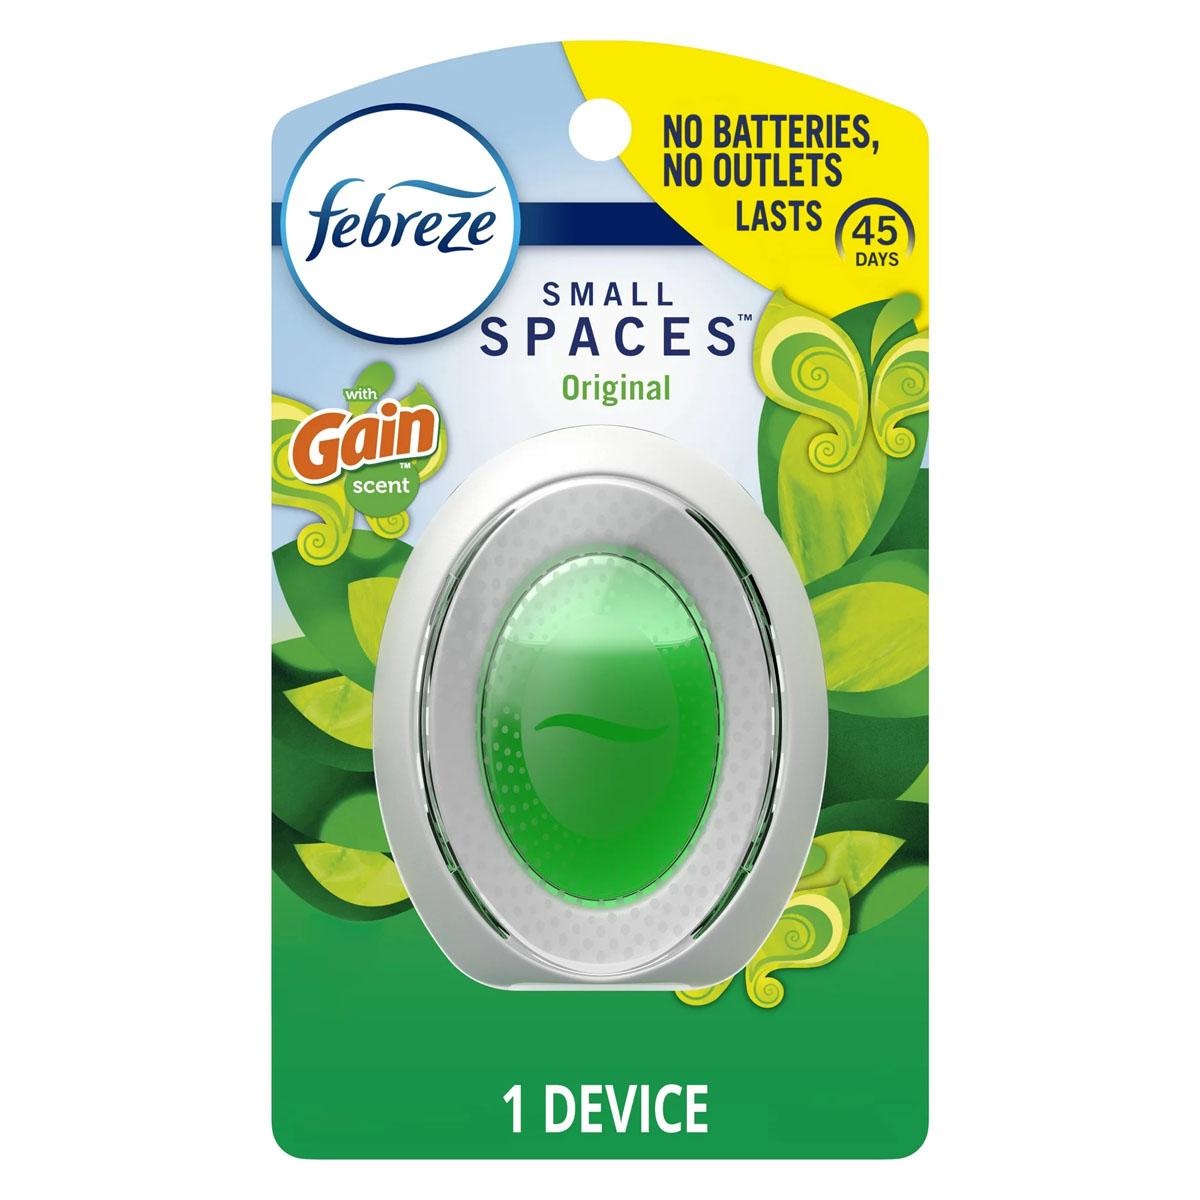 Febreze Small Spaces Air Freshener with $2.30 Walmart Cash for $3.42